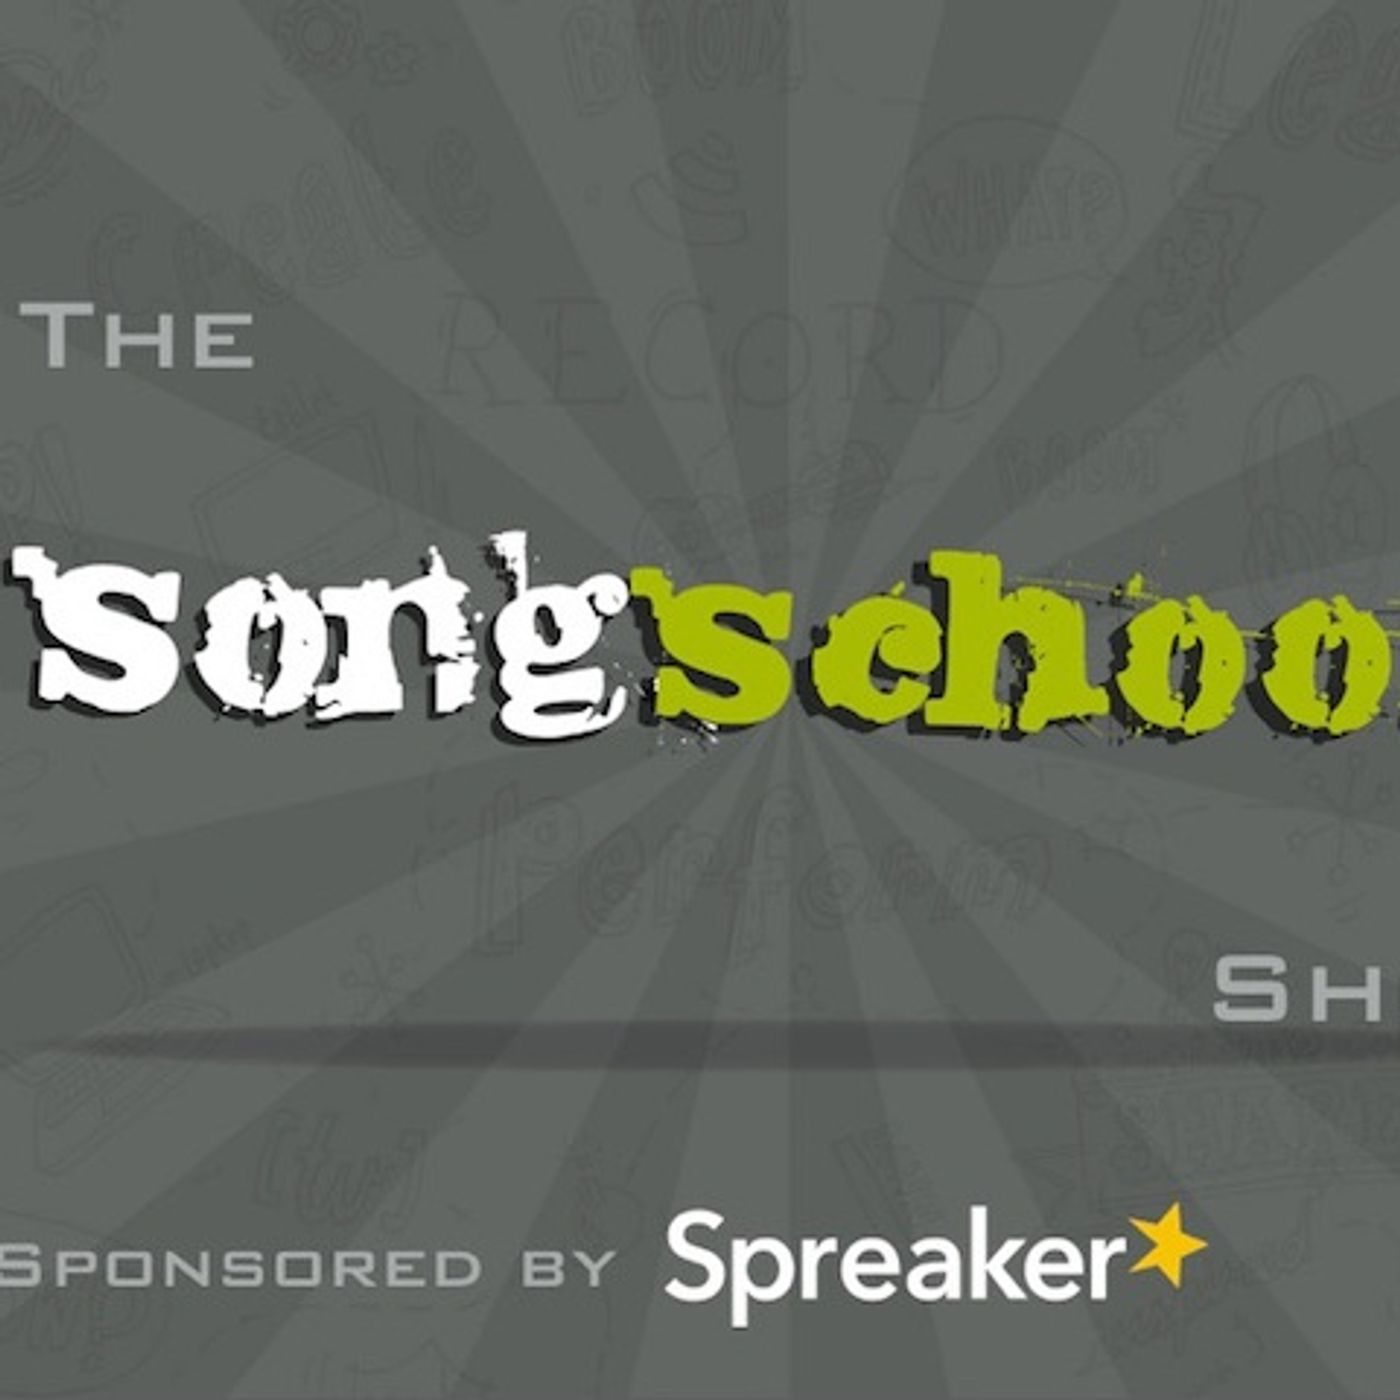 The Songschool Show @ Wexford CBS & Maynooth Post Primary School